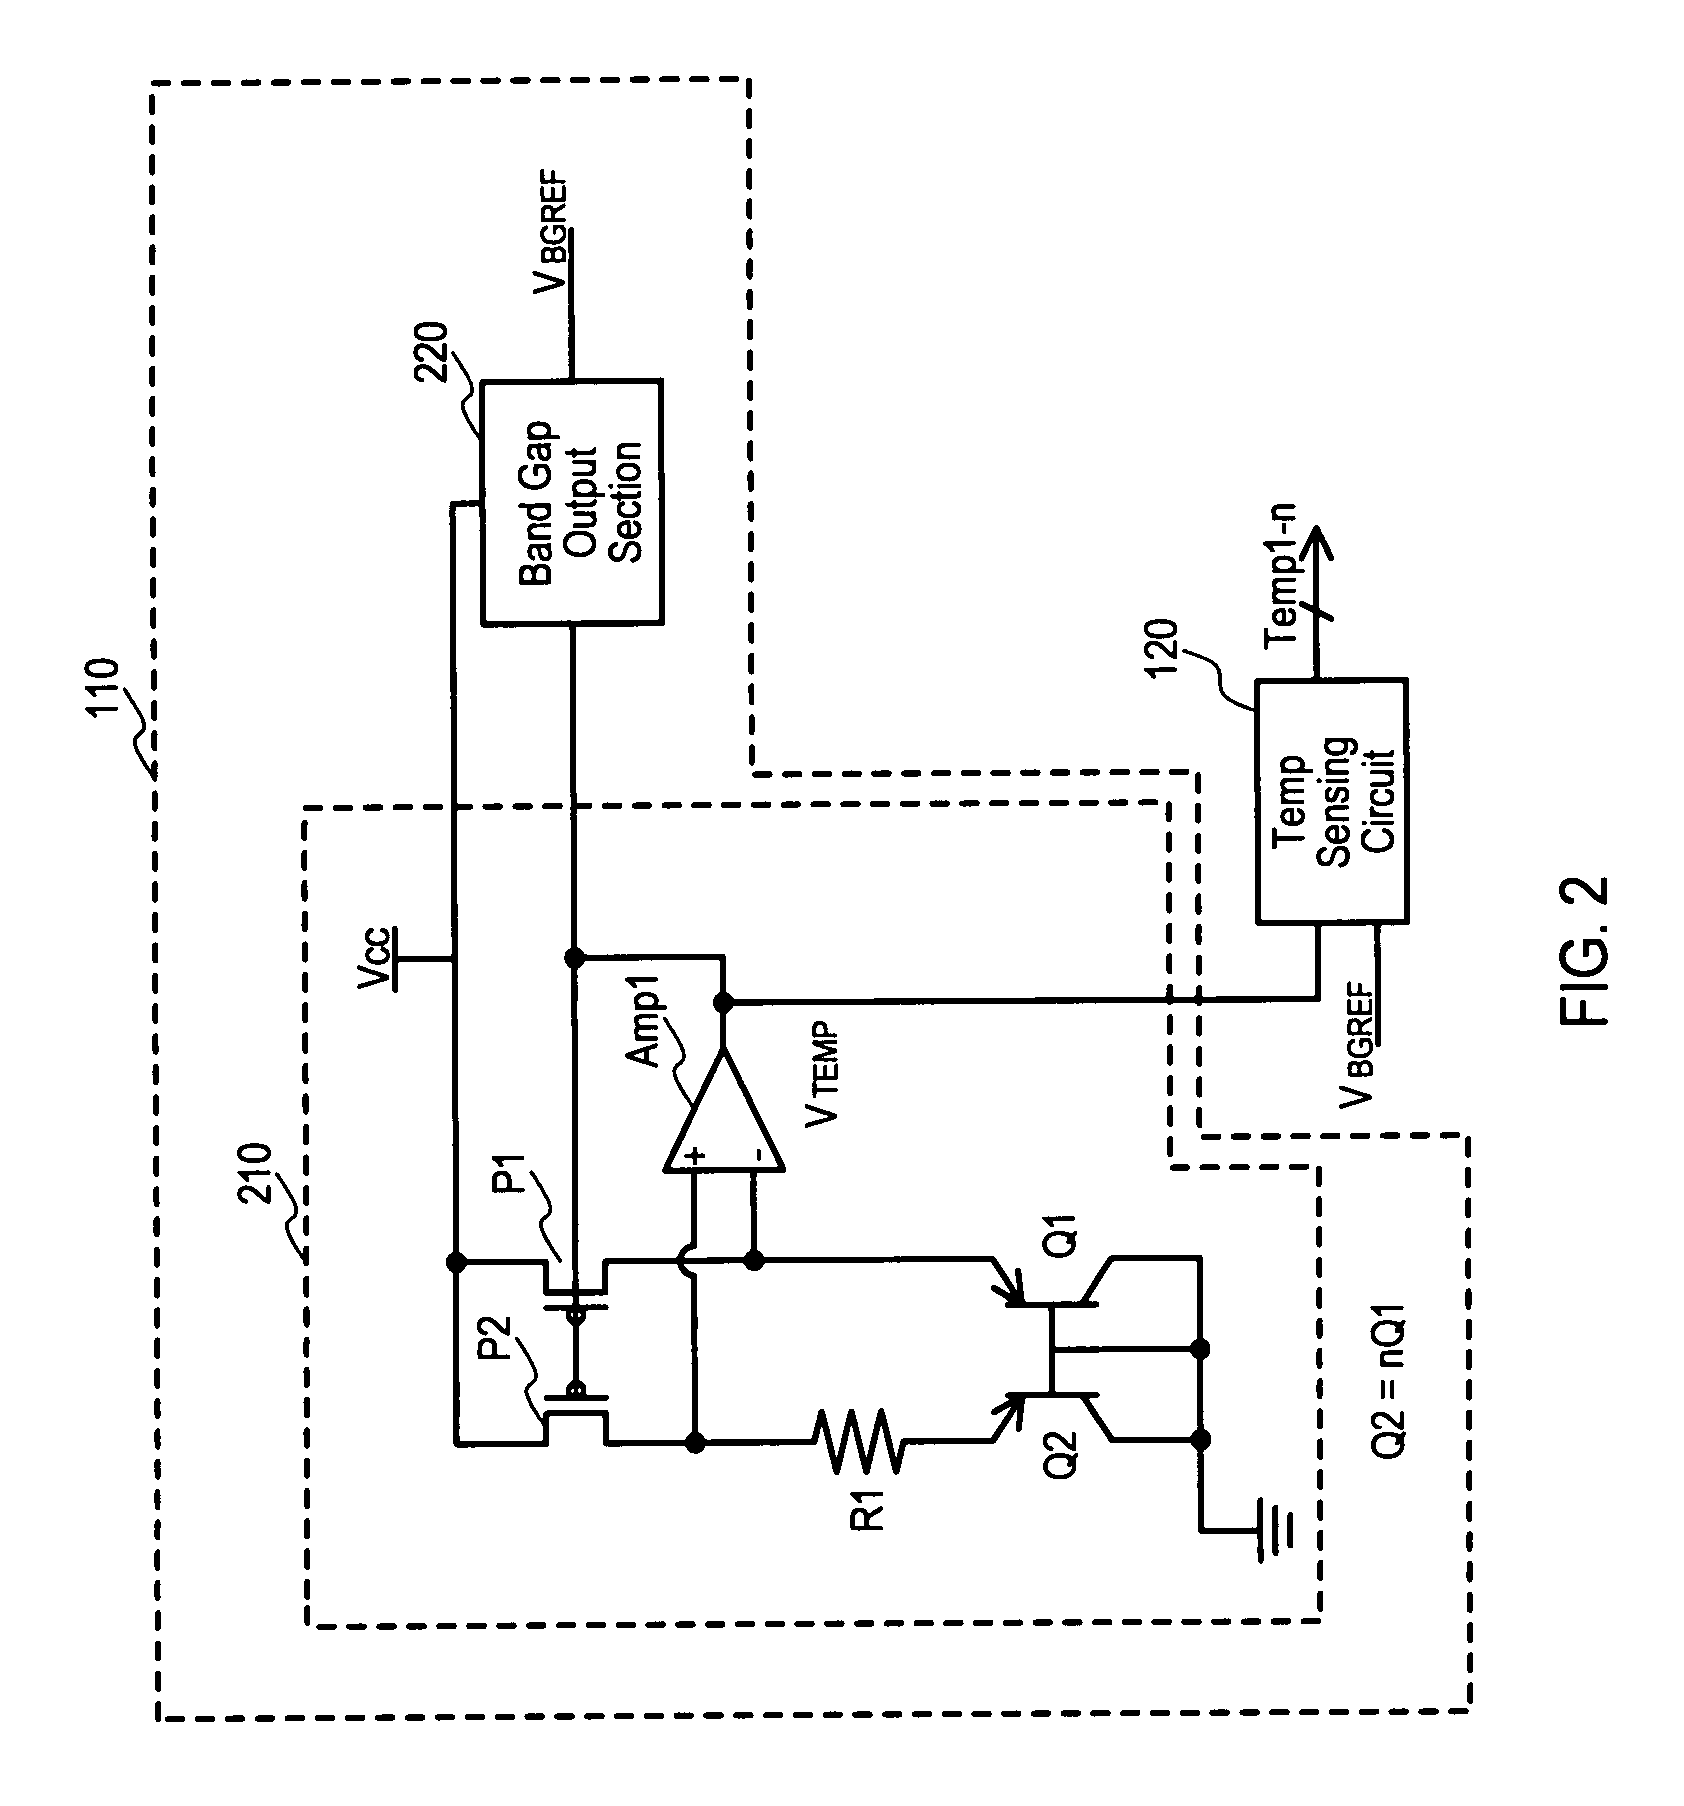 Semiconductor device having variable parameter selection based on temperature and test method